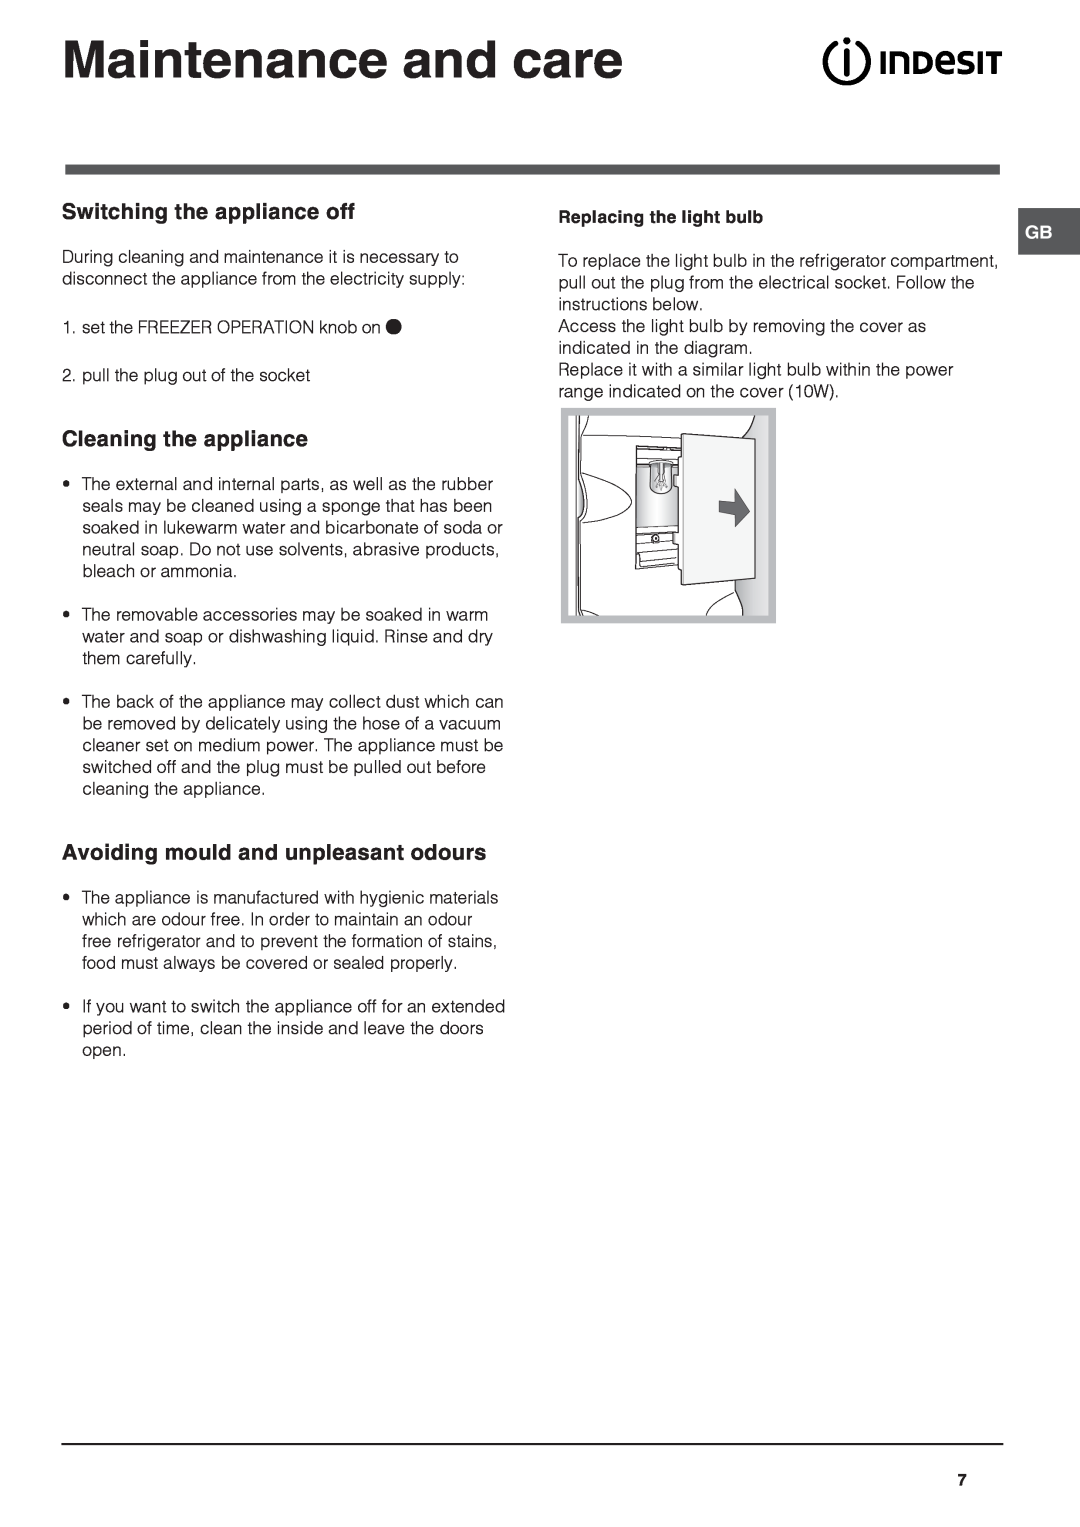 Indesit BAN 134 NF K operating instructions Maintenance and care, Switching the appliance off, Cleaning the appliance 